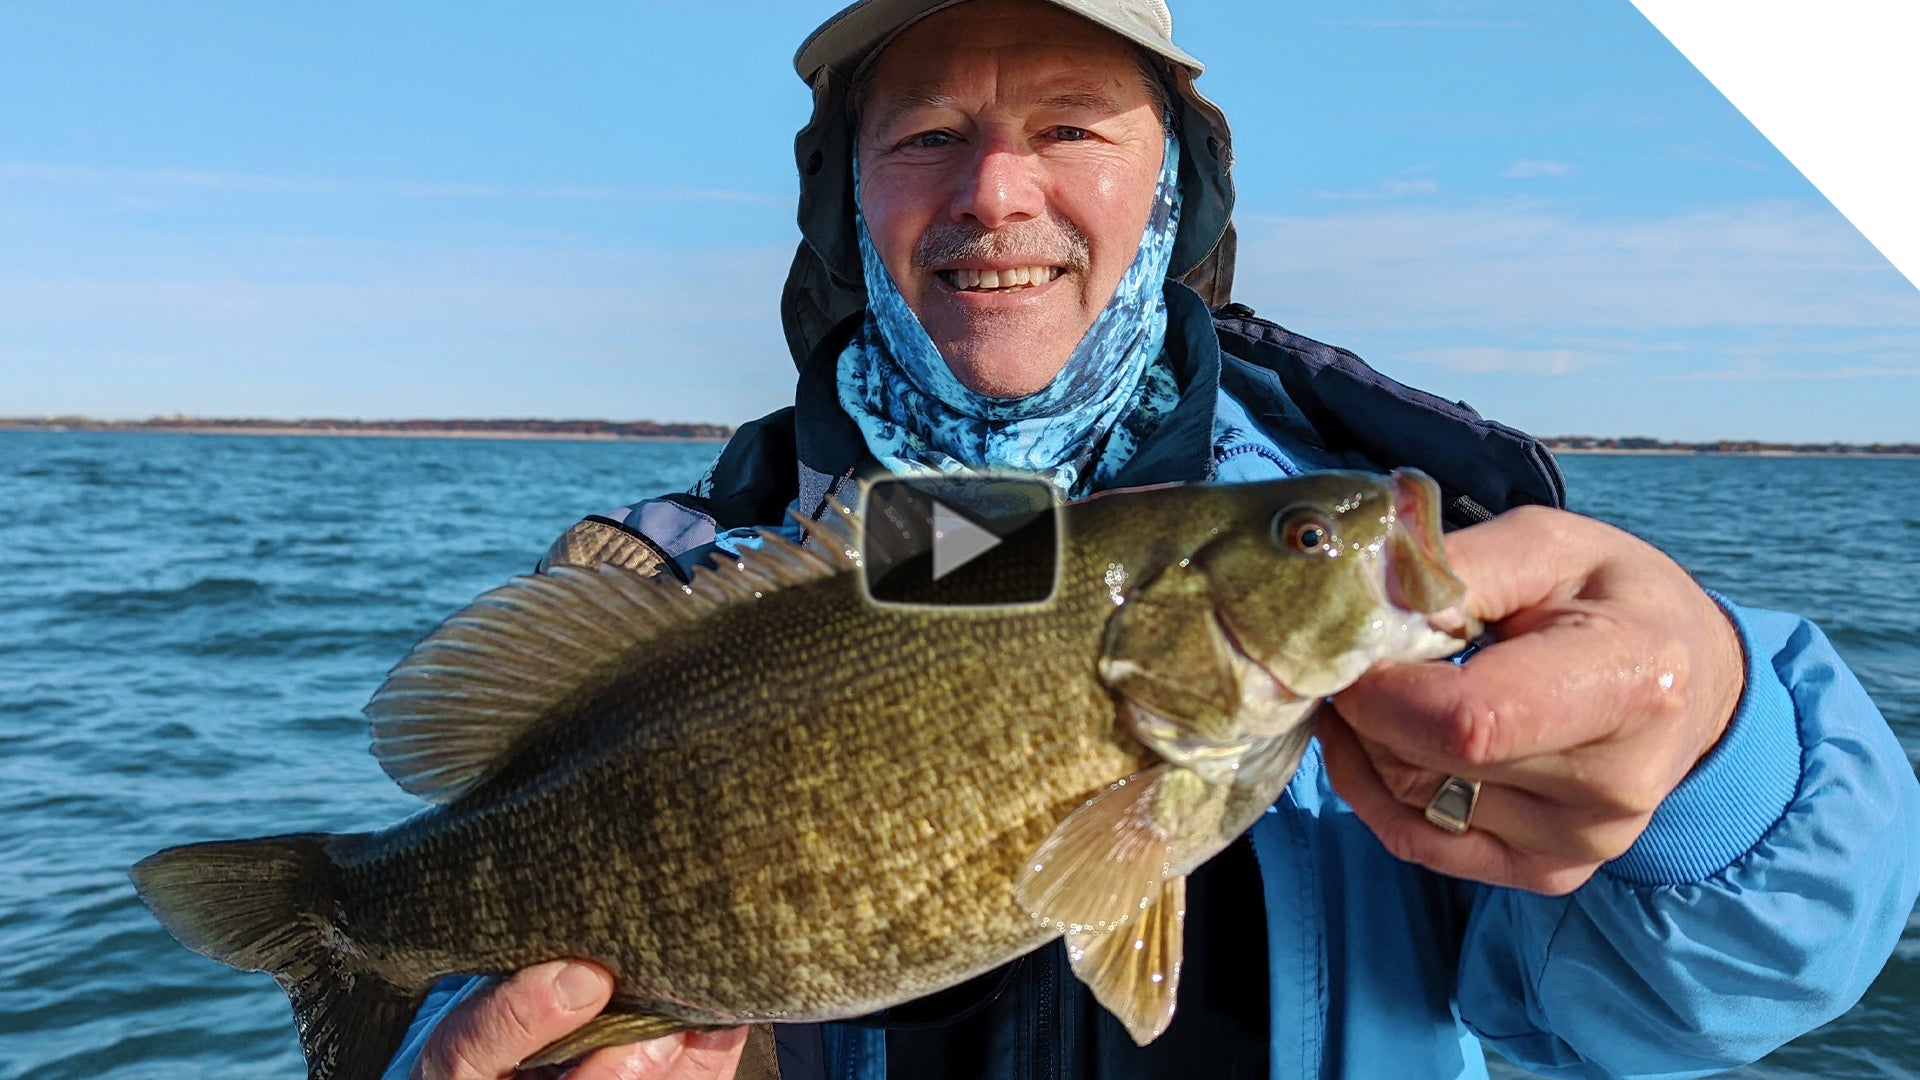 How to jig for bass with Jigging Spoons